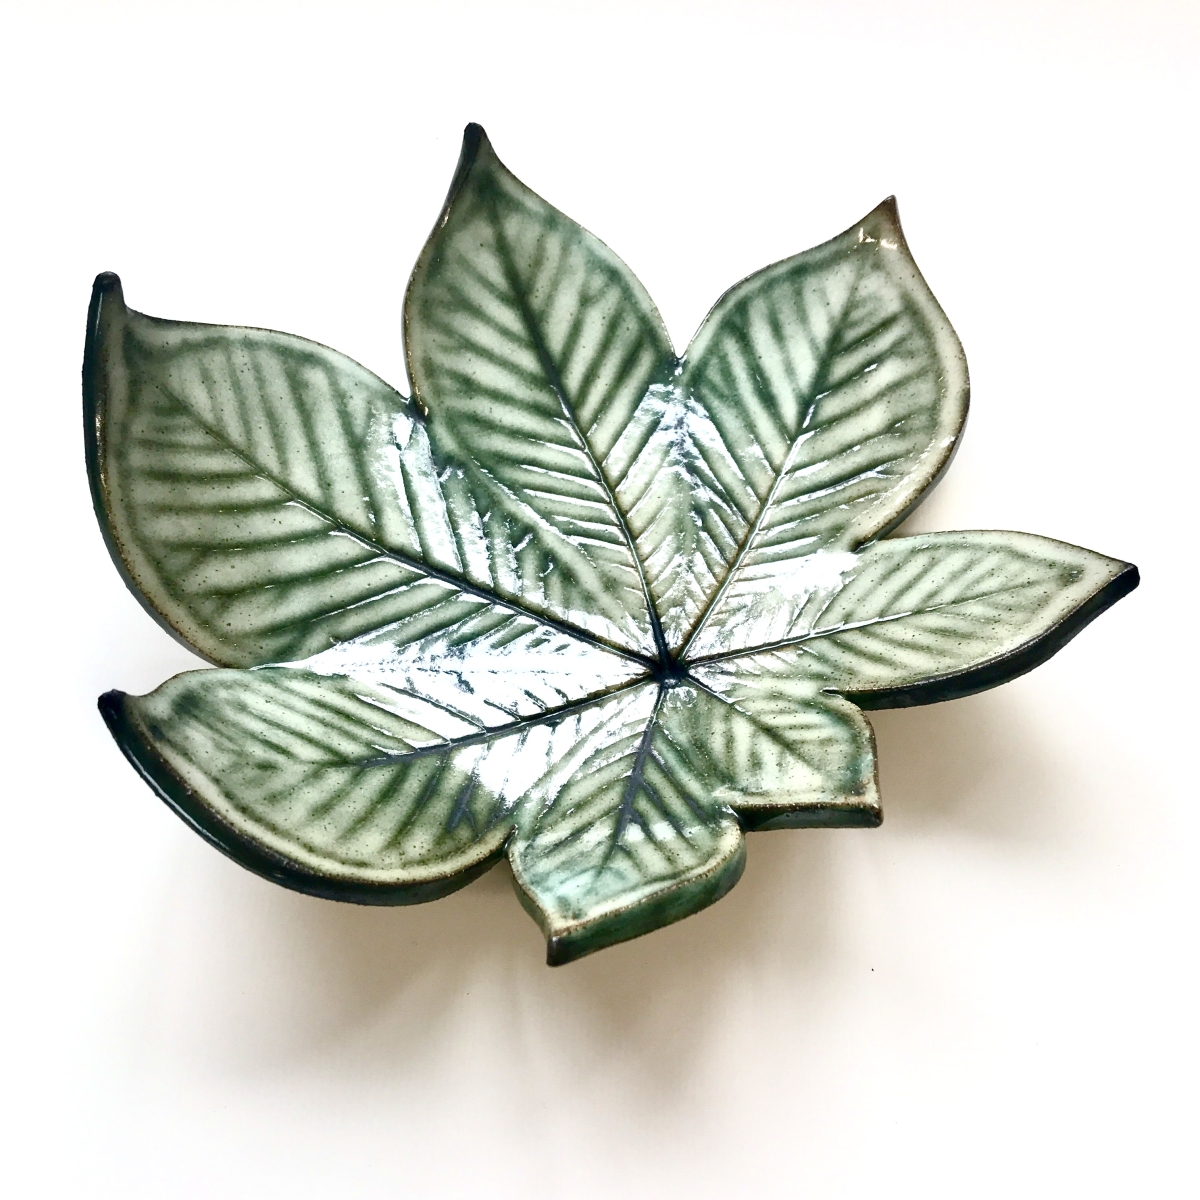 Rustic Green Horse Chestnut Leaf Trinket Dish by Ceramics Inspired By Nature